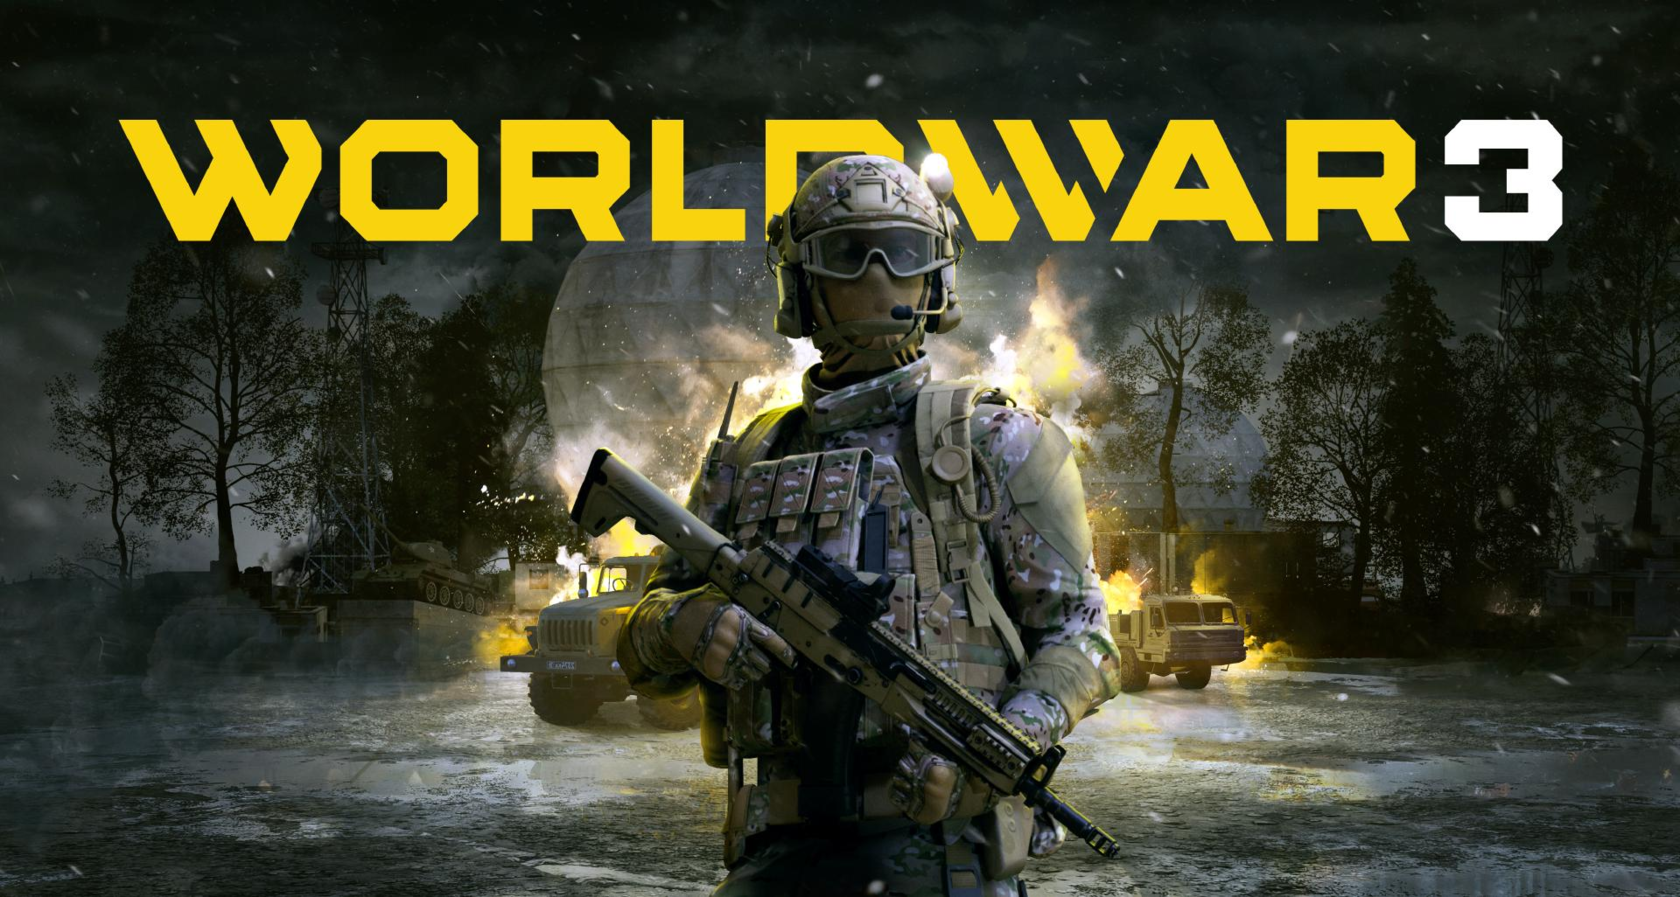 T4W and The Farm 51's World War 3 launches in Open Beta Test on September  29 in MENA & Turkey.